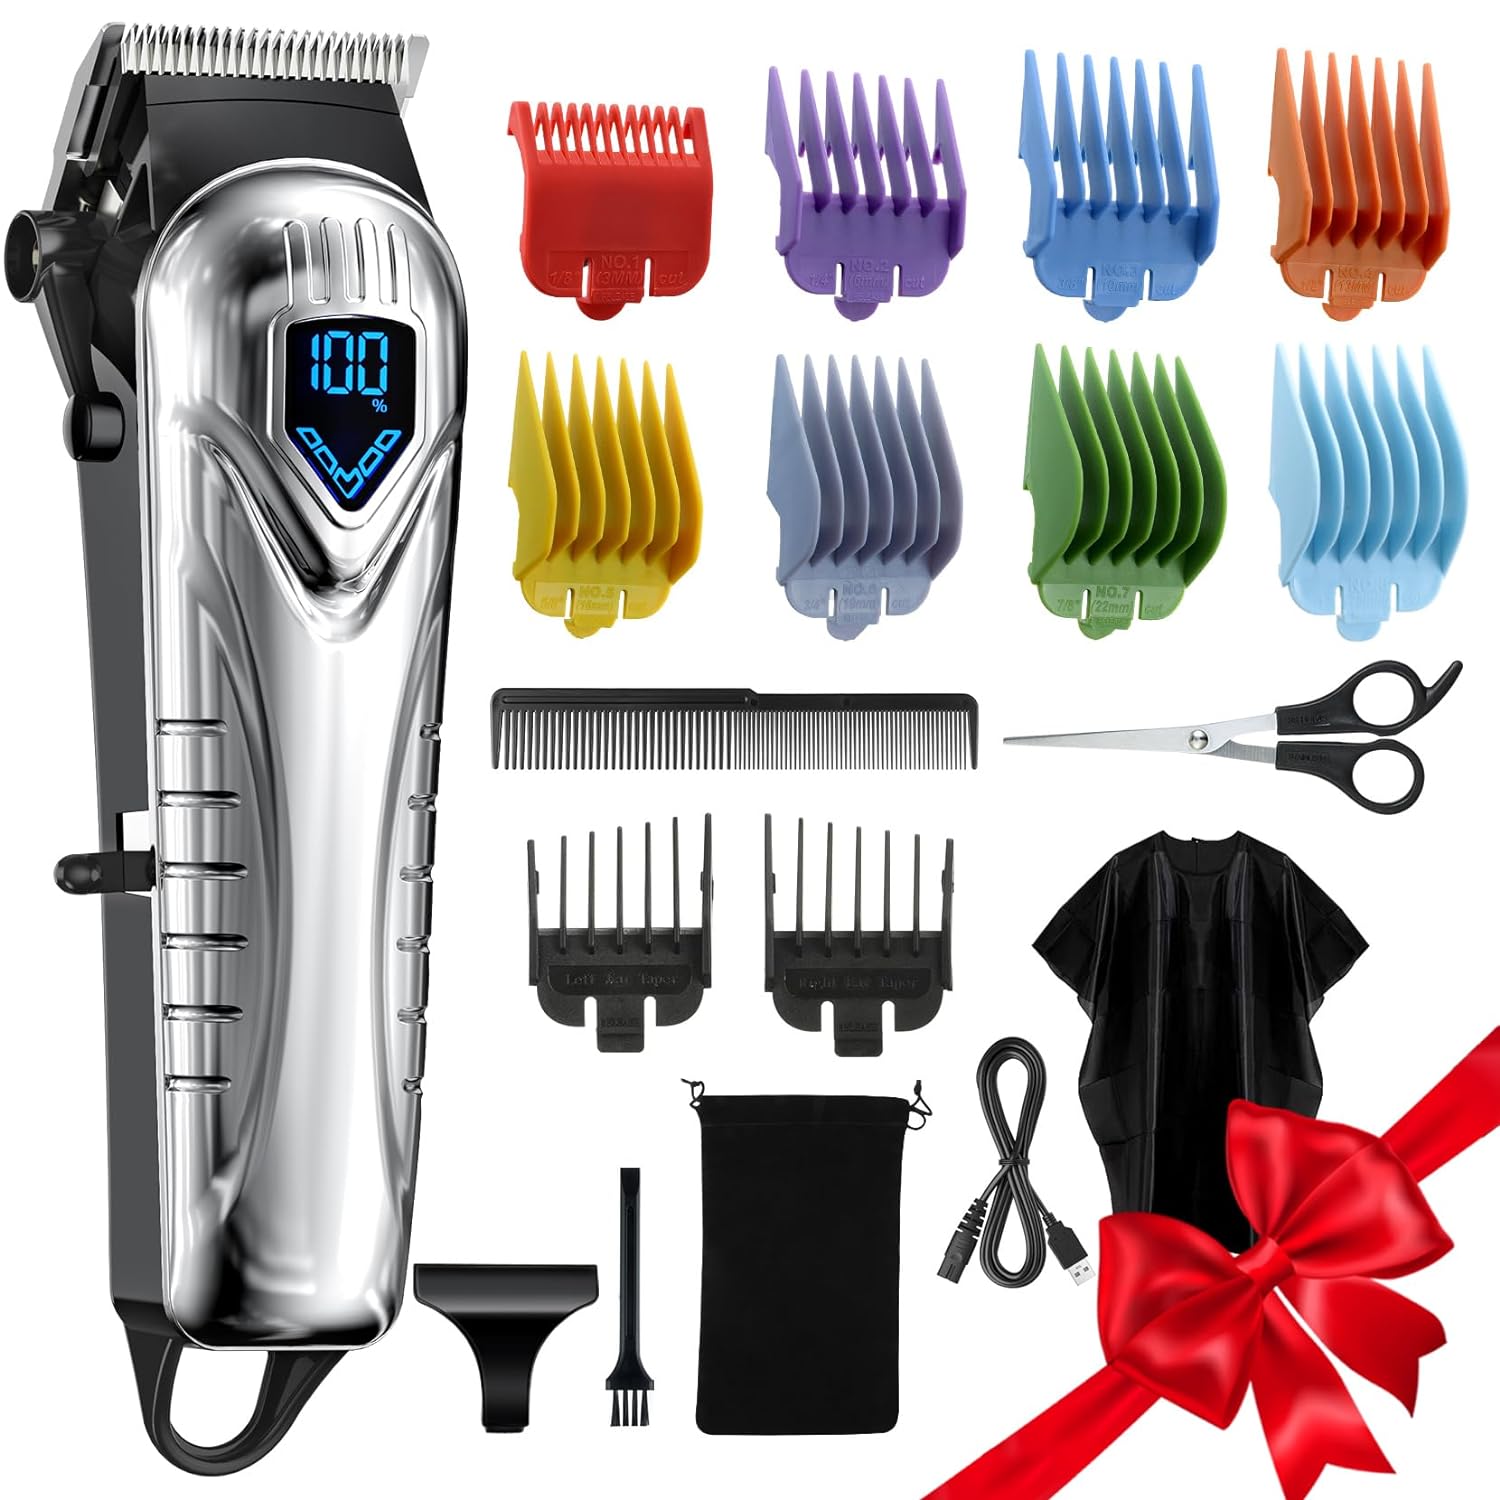 Snag Your Exclusive Discount on Hair Clippers for Men - Limited-Time Promo!